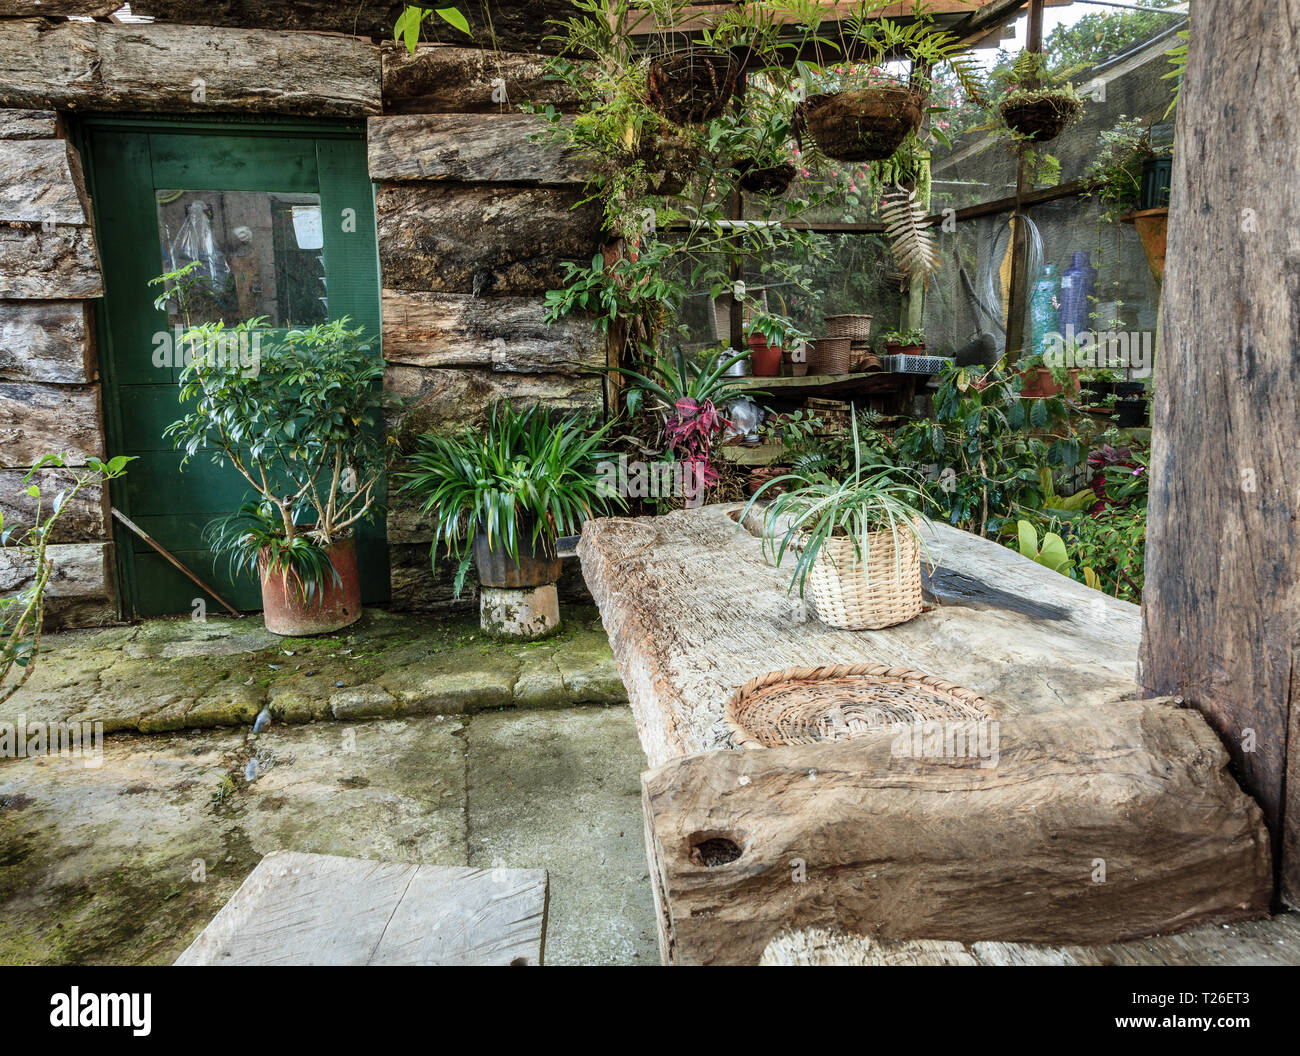 Interior of an old rustic green house with potted plants Stock Photo